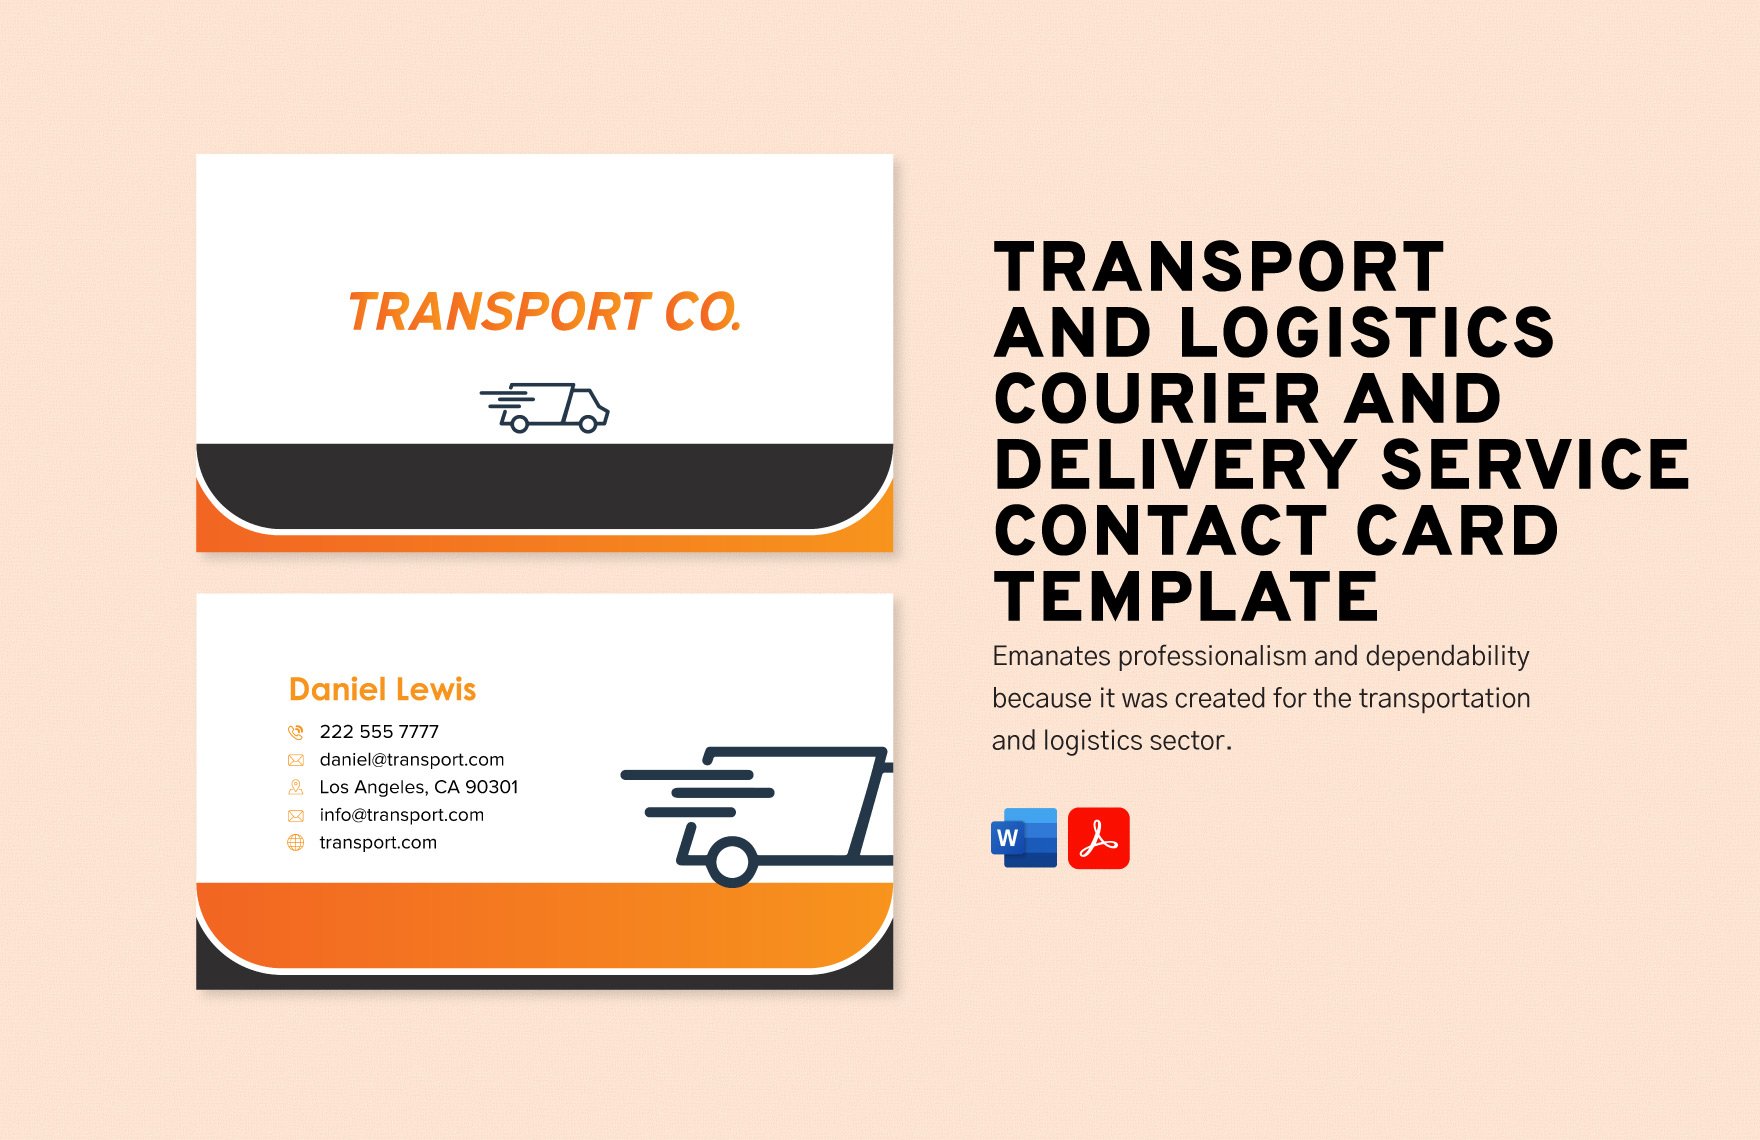 Transport and Logistics Courier and Delivery Service Contact Card Template